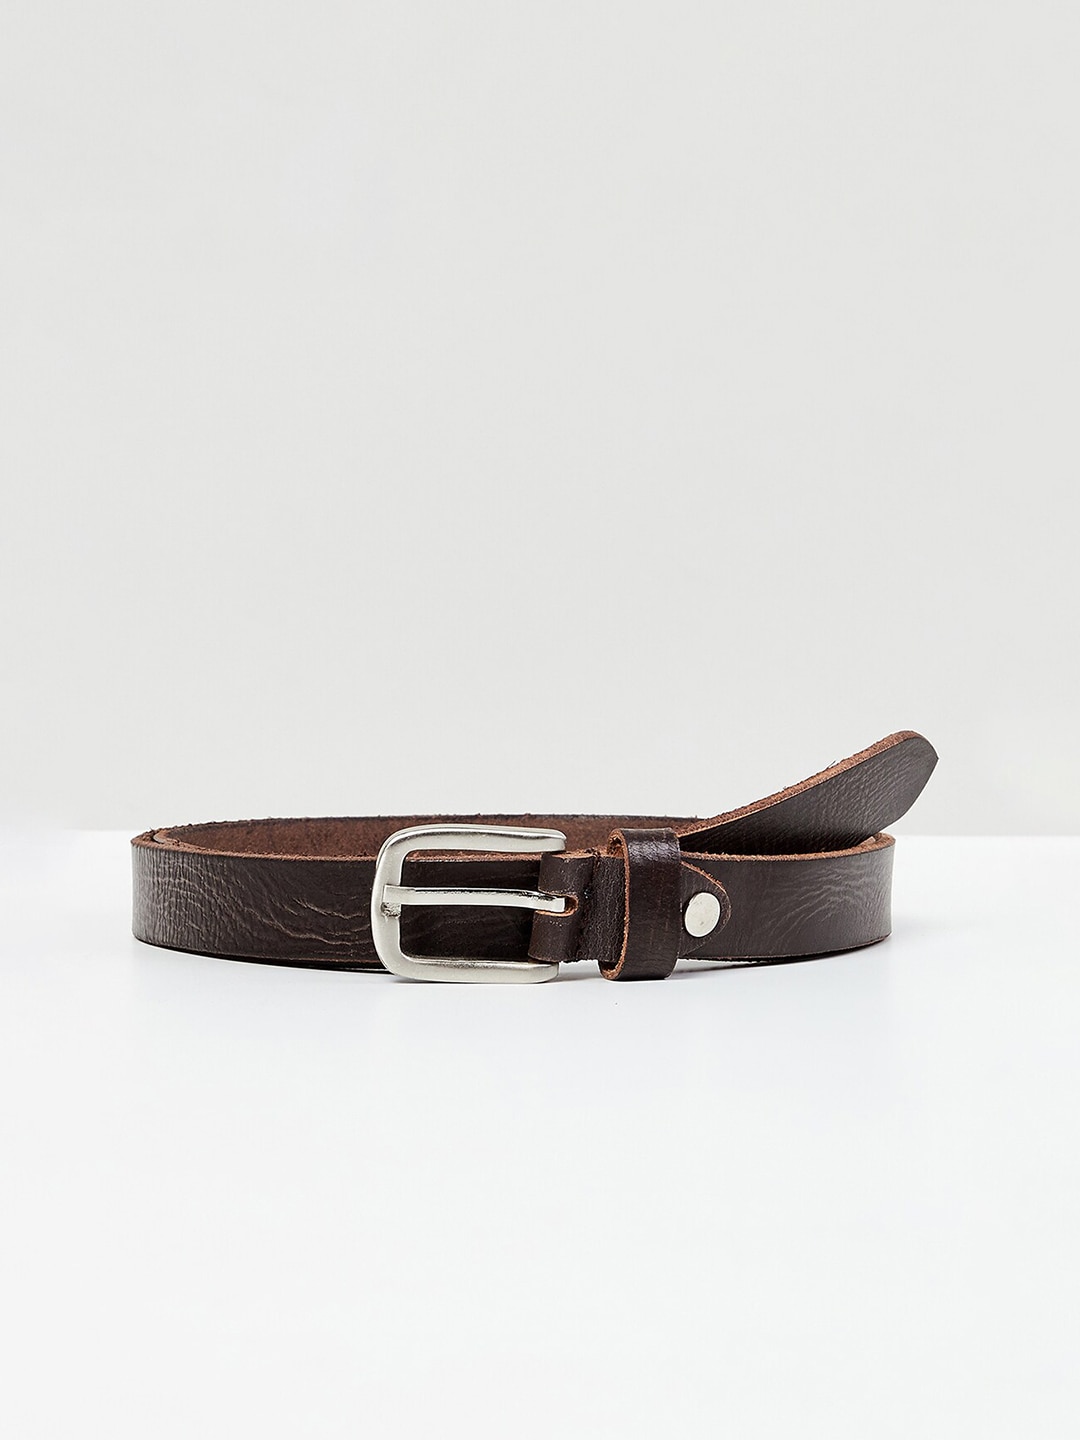 max Women Brown Leather Belt Price in India